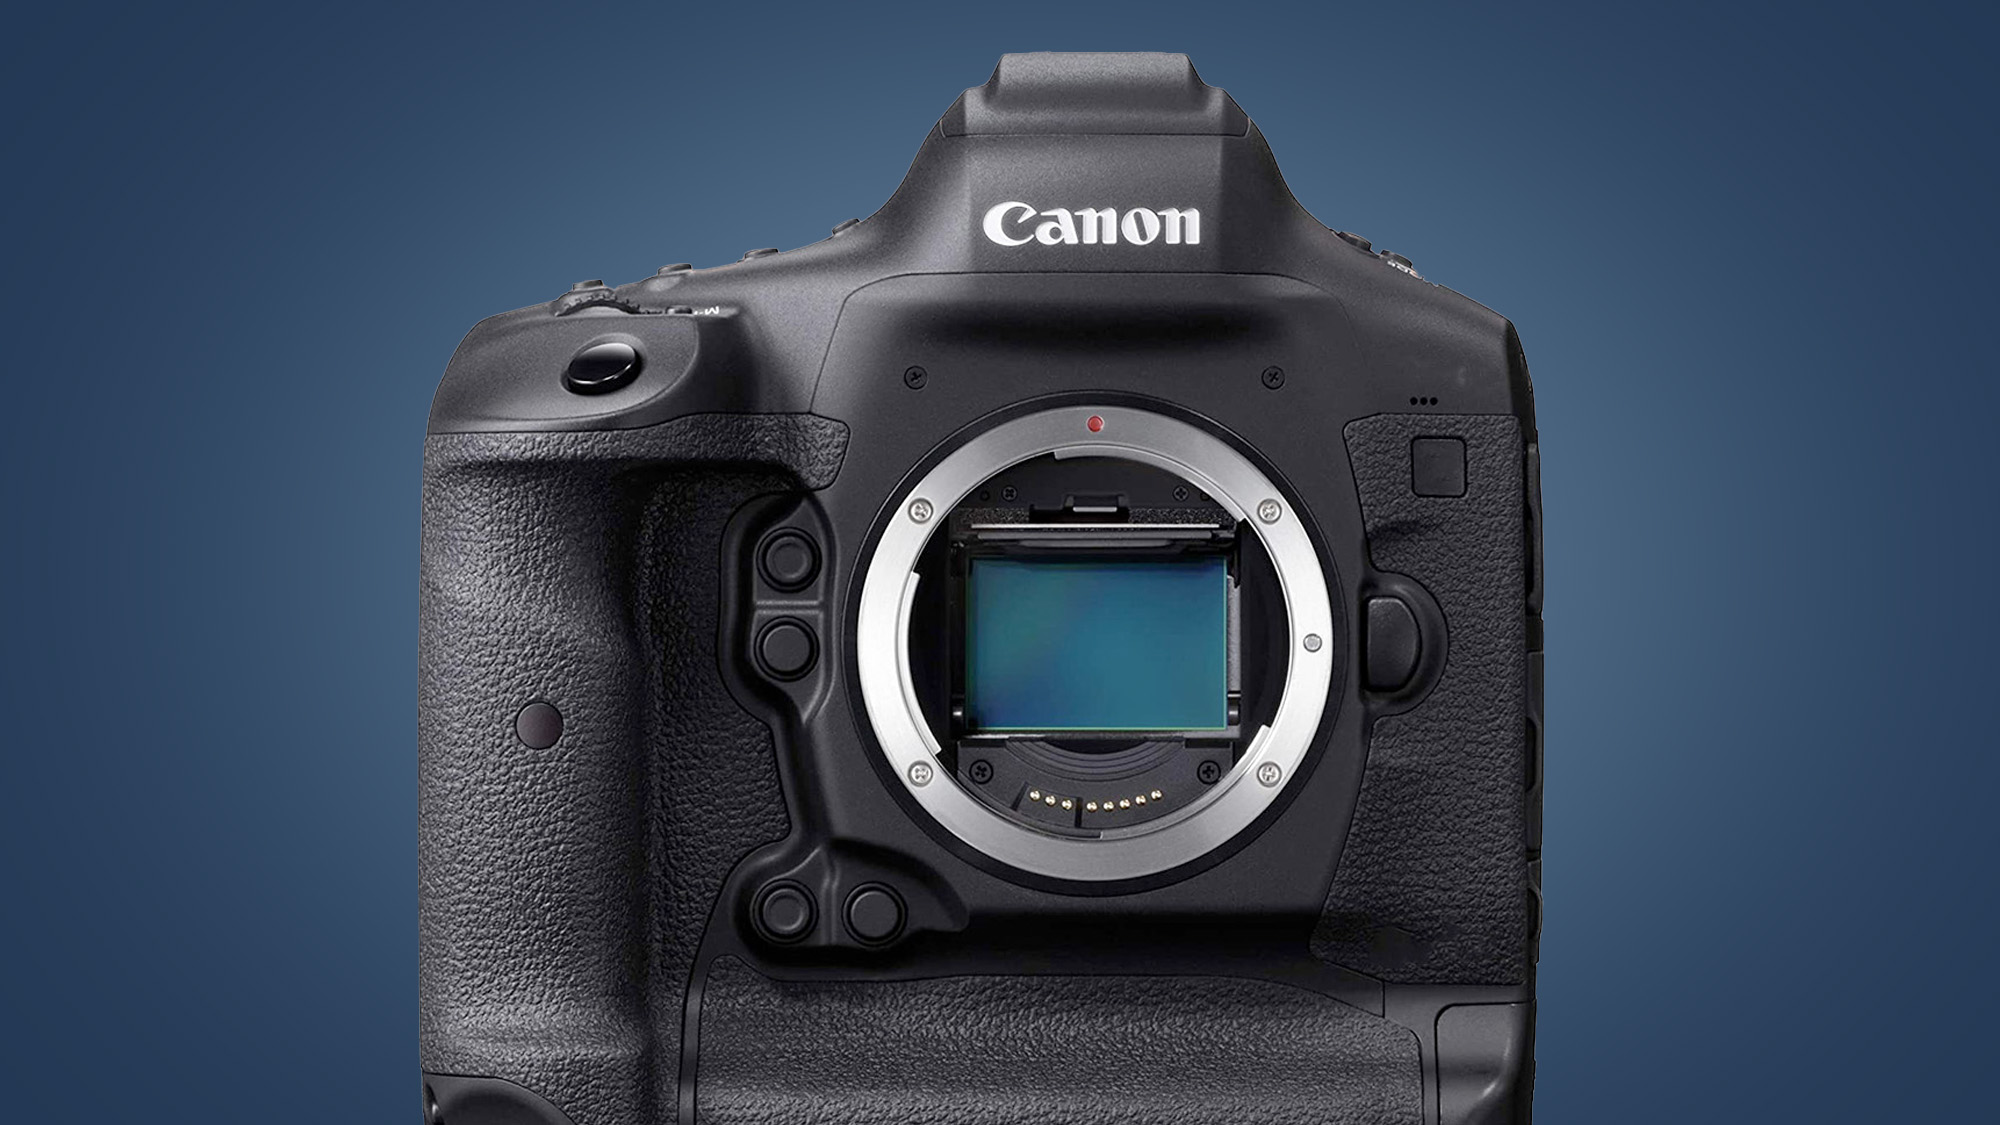 The Canon EOS 1D X Mark III DSLR on a blue background